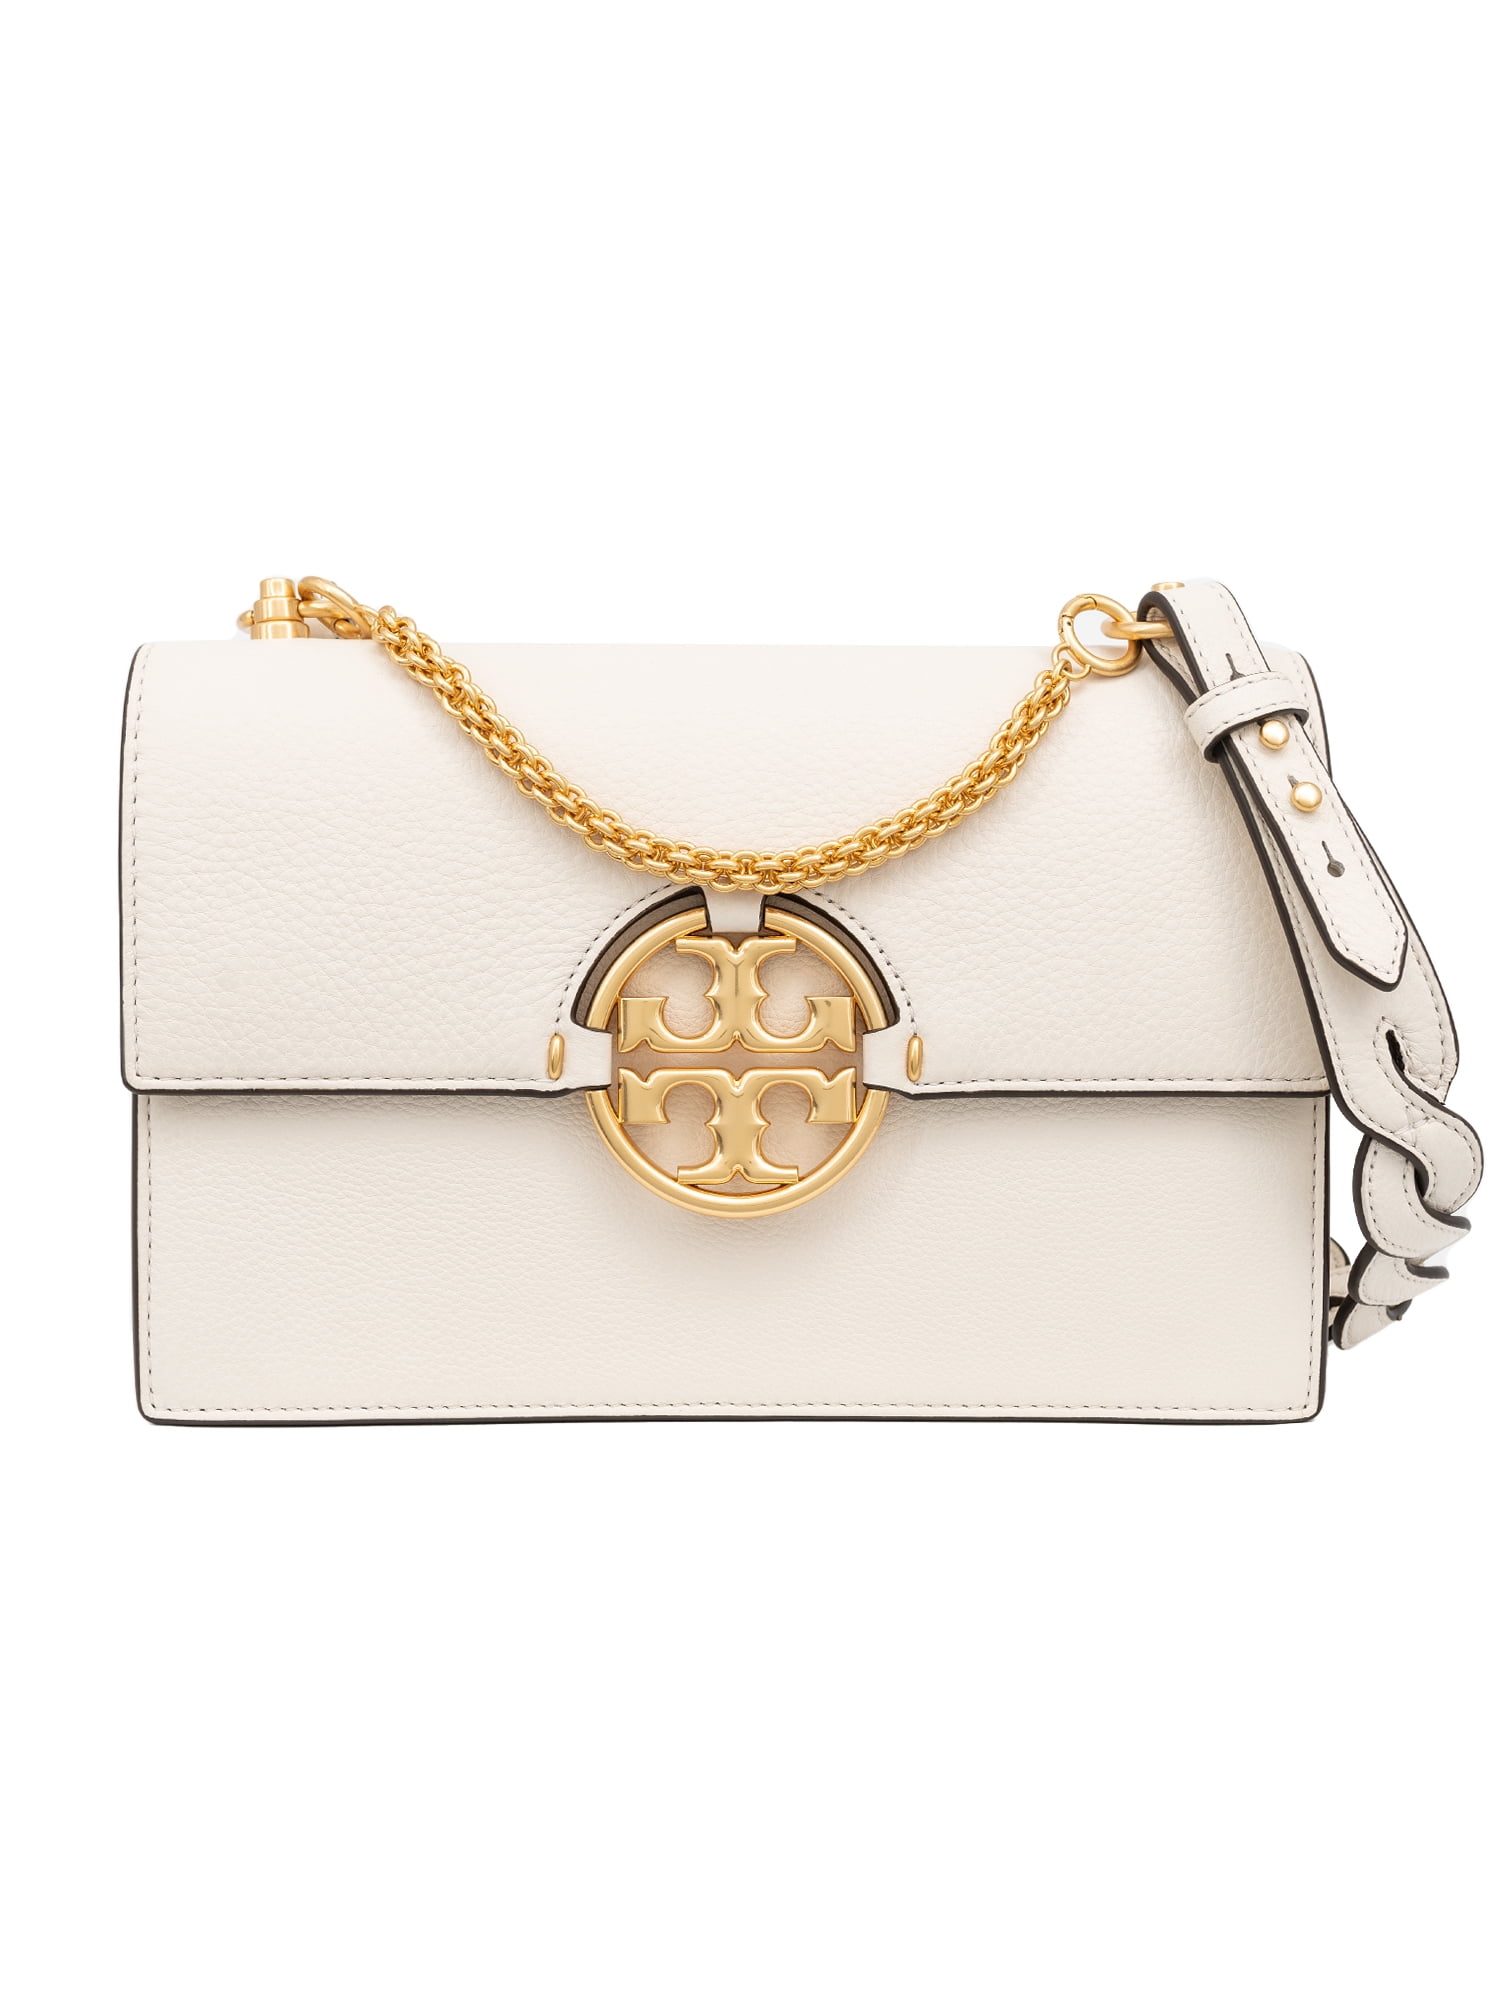 Double T Embroidered Shoulder Bag in Brown - Tory Burch